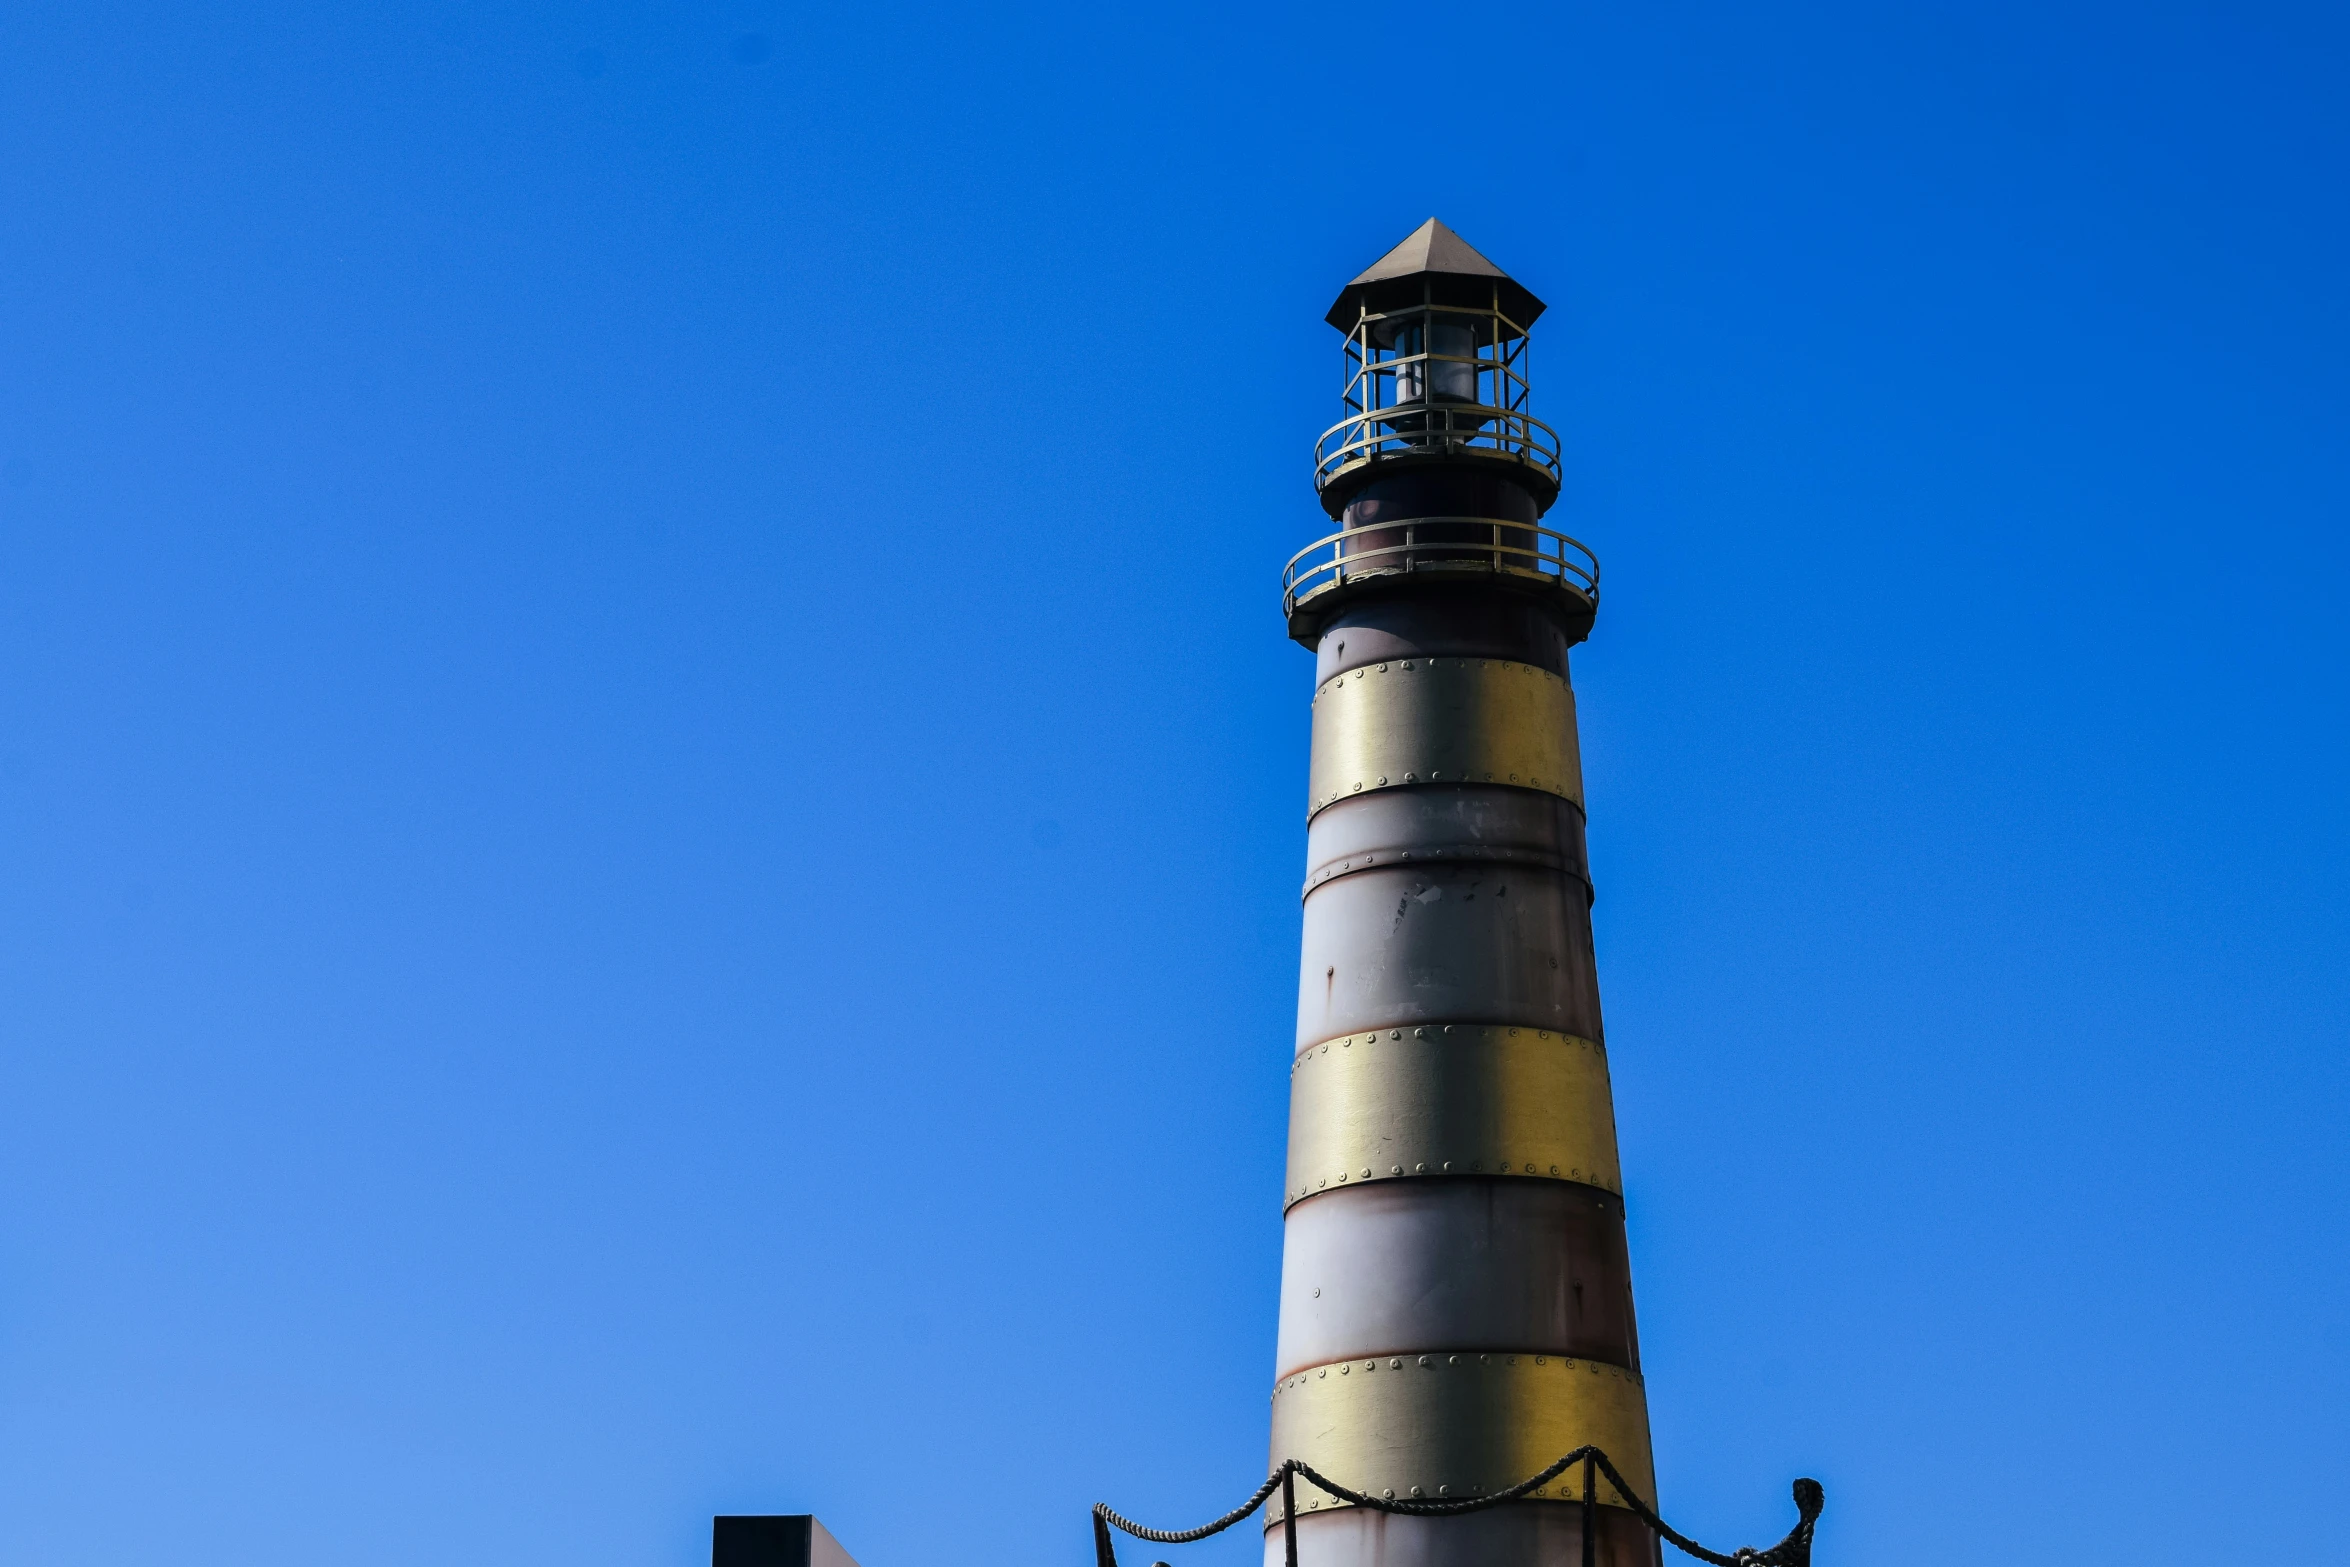 the lighthouse sits in front of a blue sky